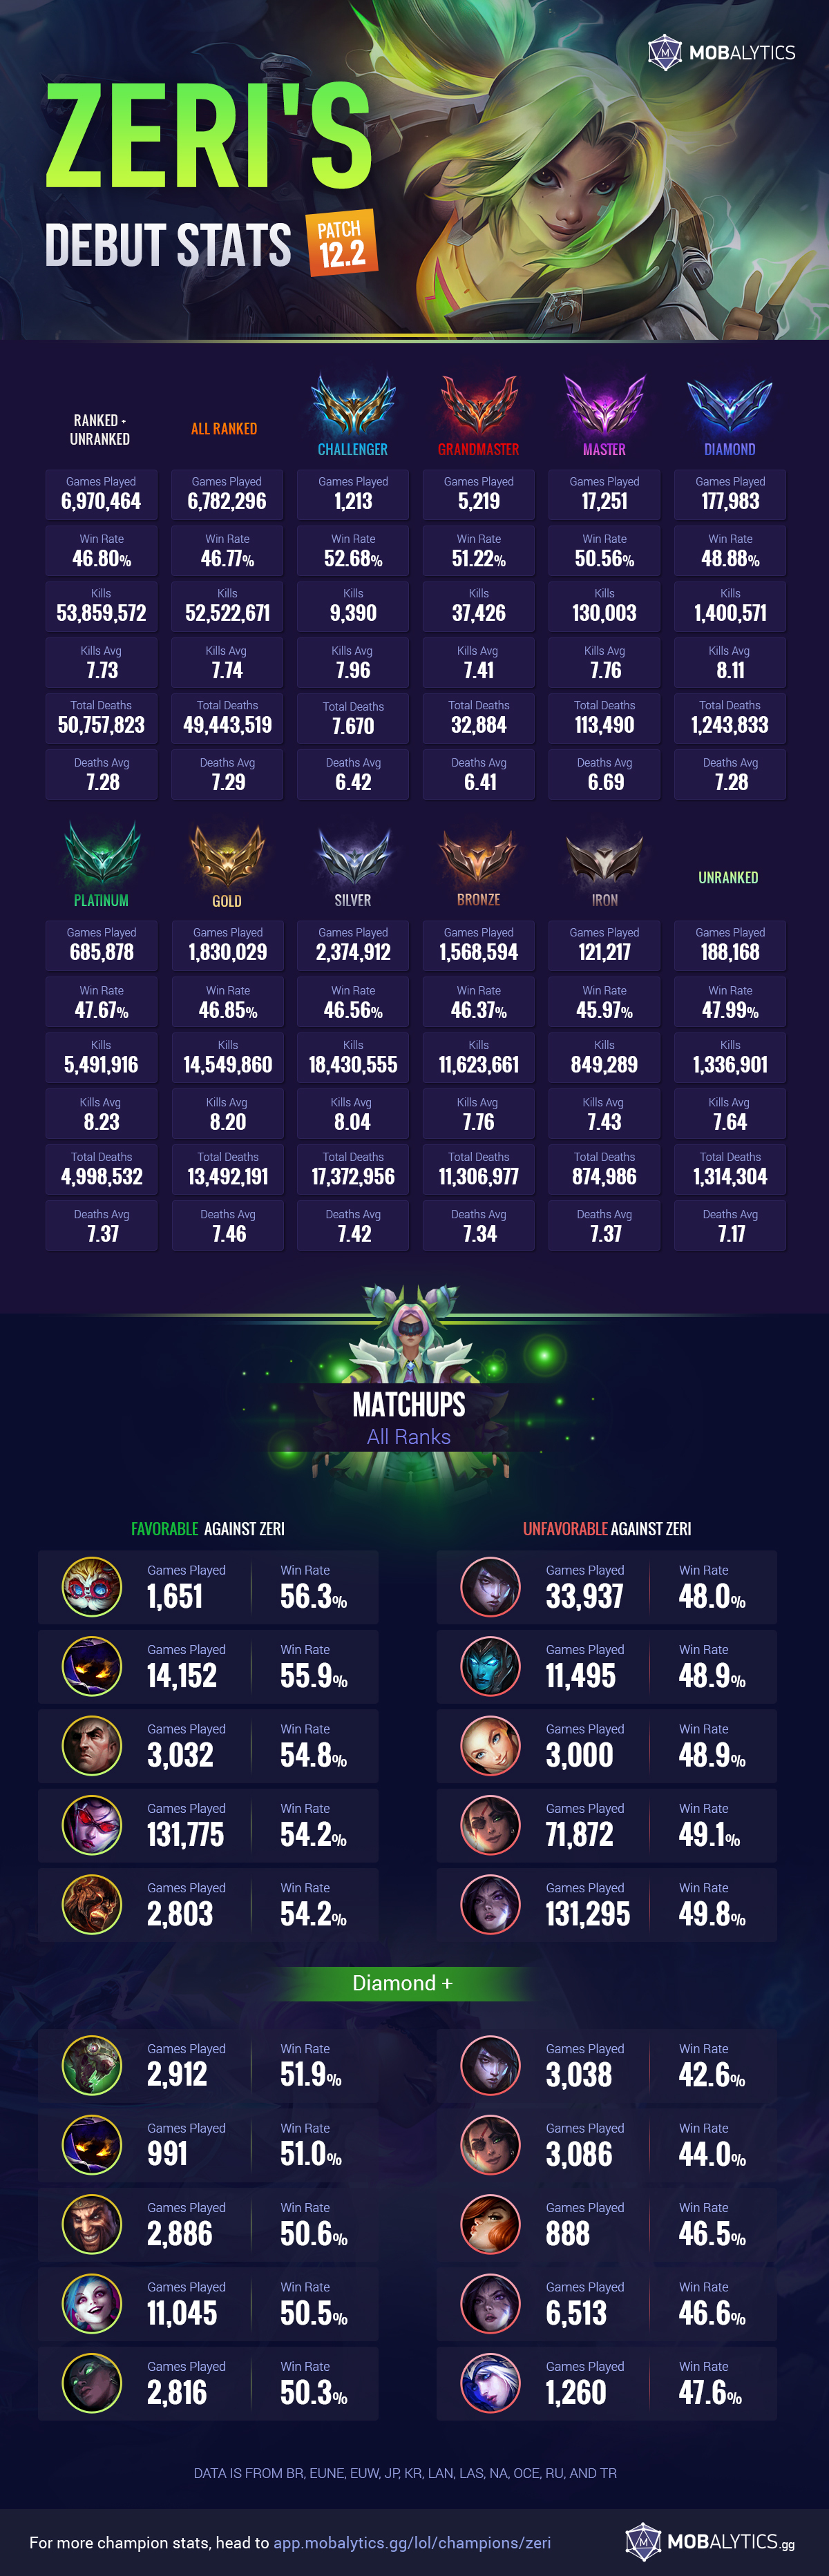 Zeri’s New Champ Debut Stats: Games Played, Win Rate, and More by Rank